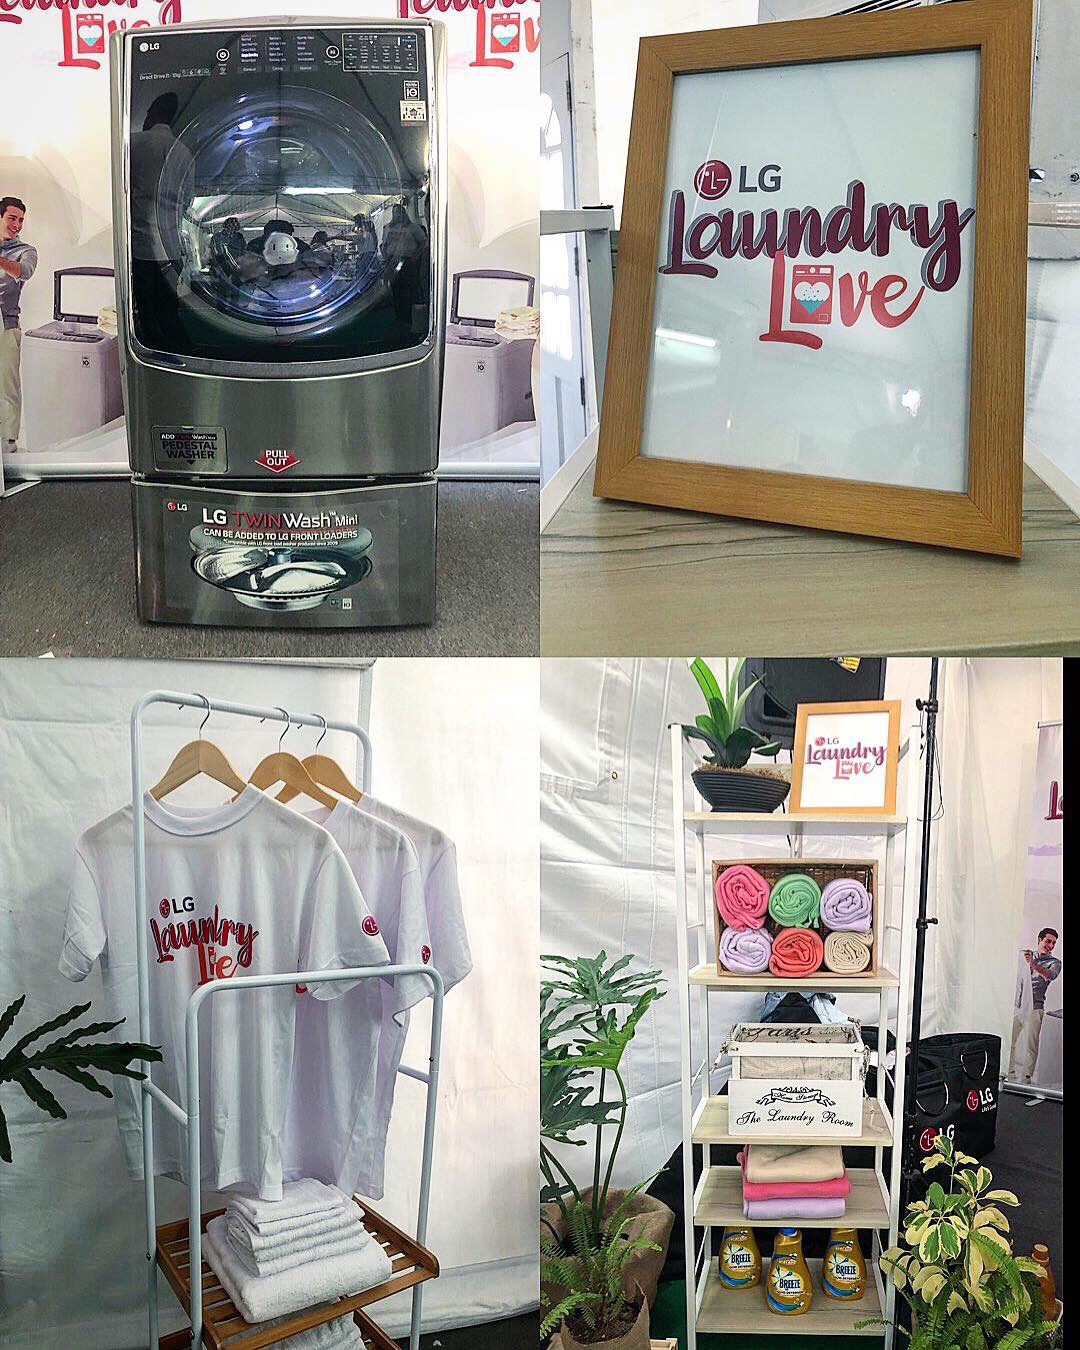 LG Launches Laundry Love: empowers National ilovetoeatph LG with washers the to – Month, family laundry On do Women\'s alpha-males LG